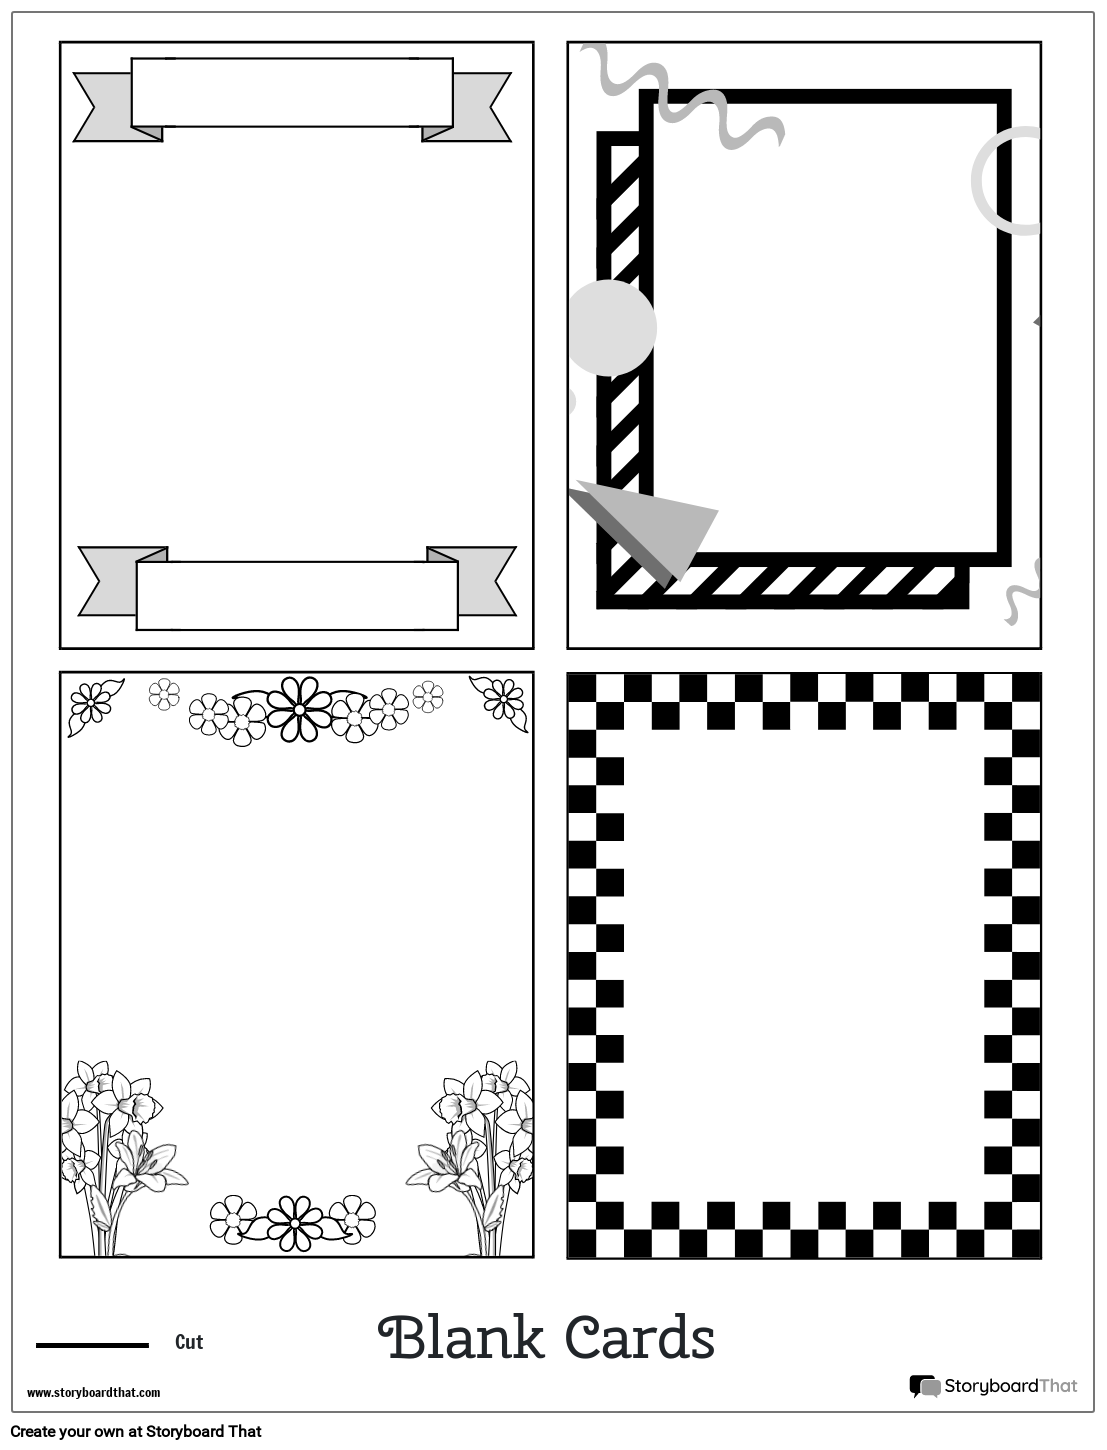 Decorated Card Worksheet with Shapes and Patterns